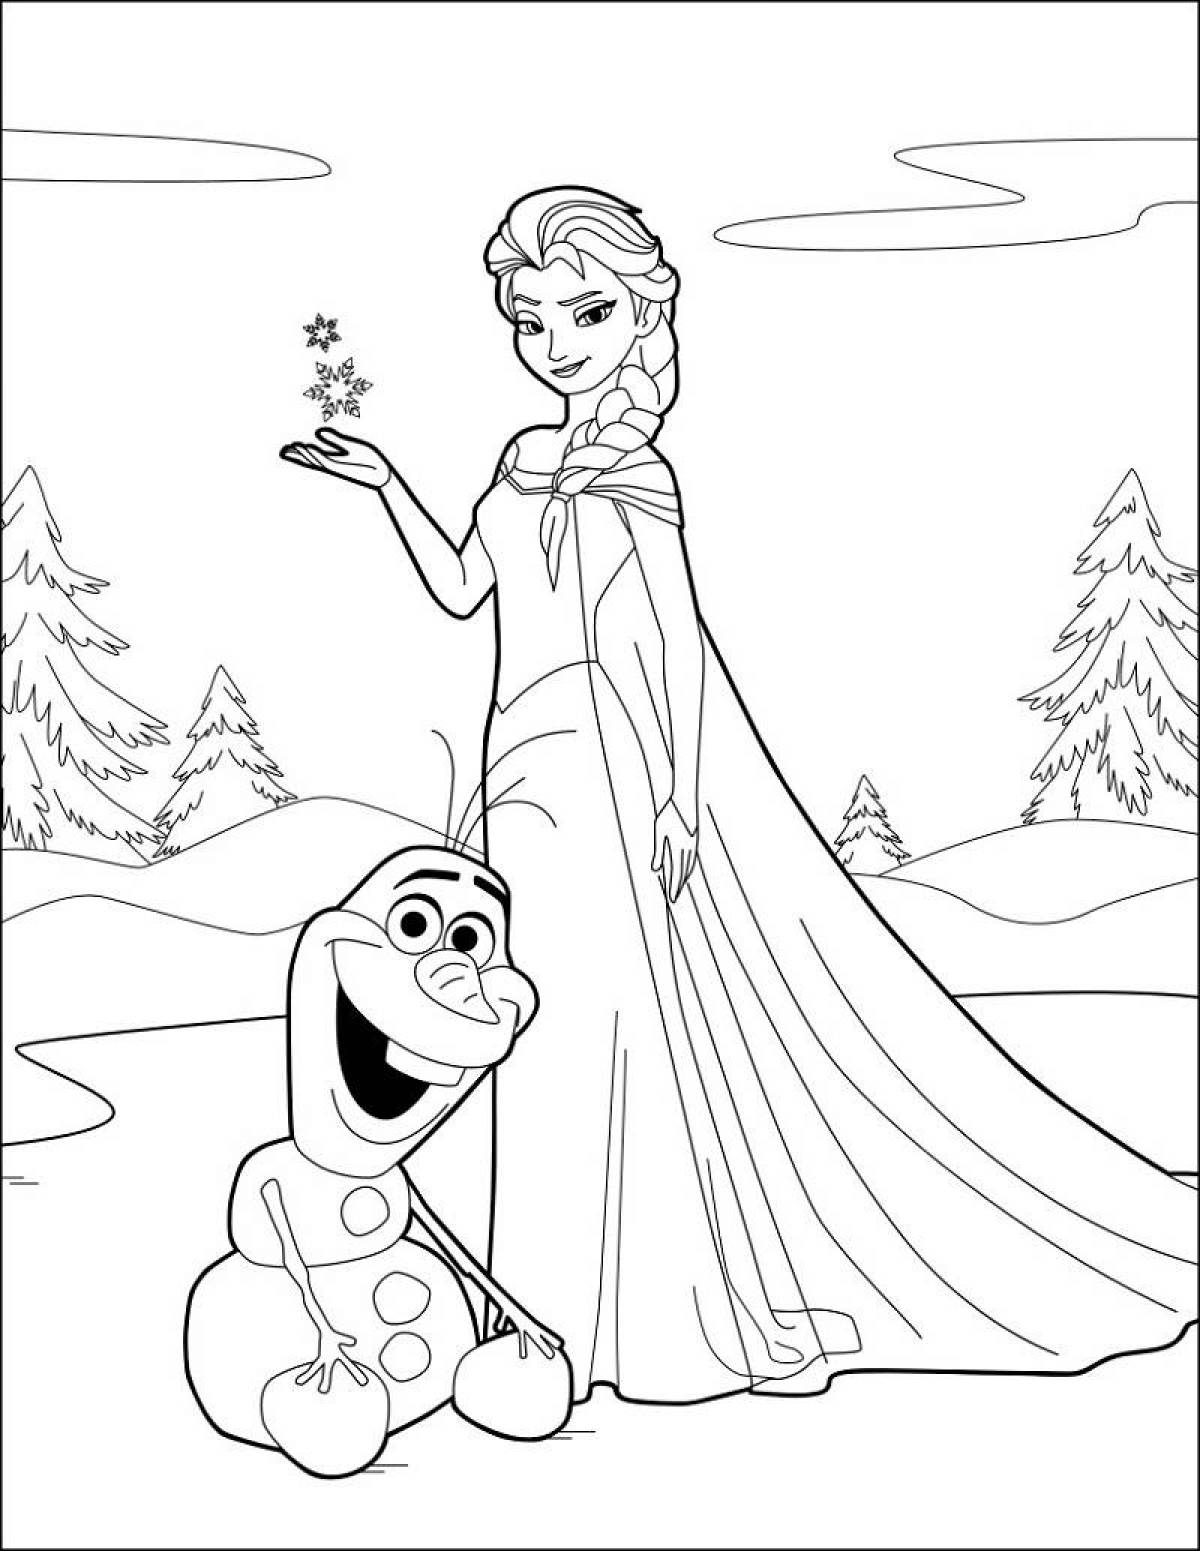 Elsa coloring book for kids 5-6 years old